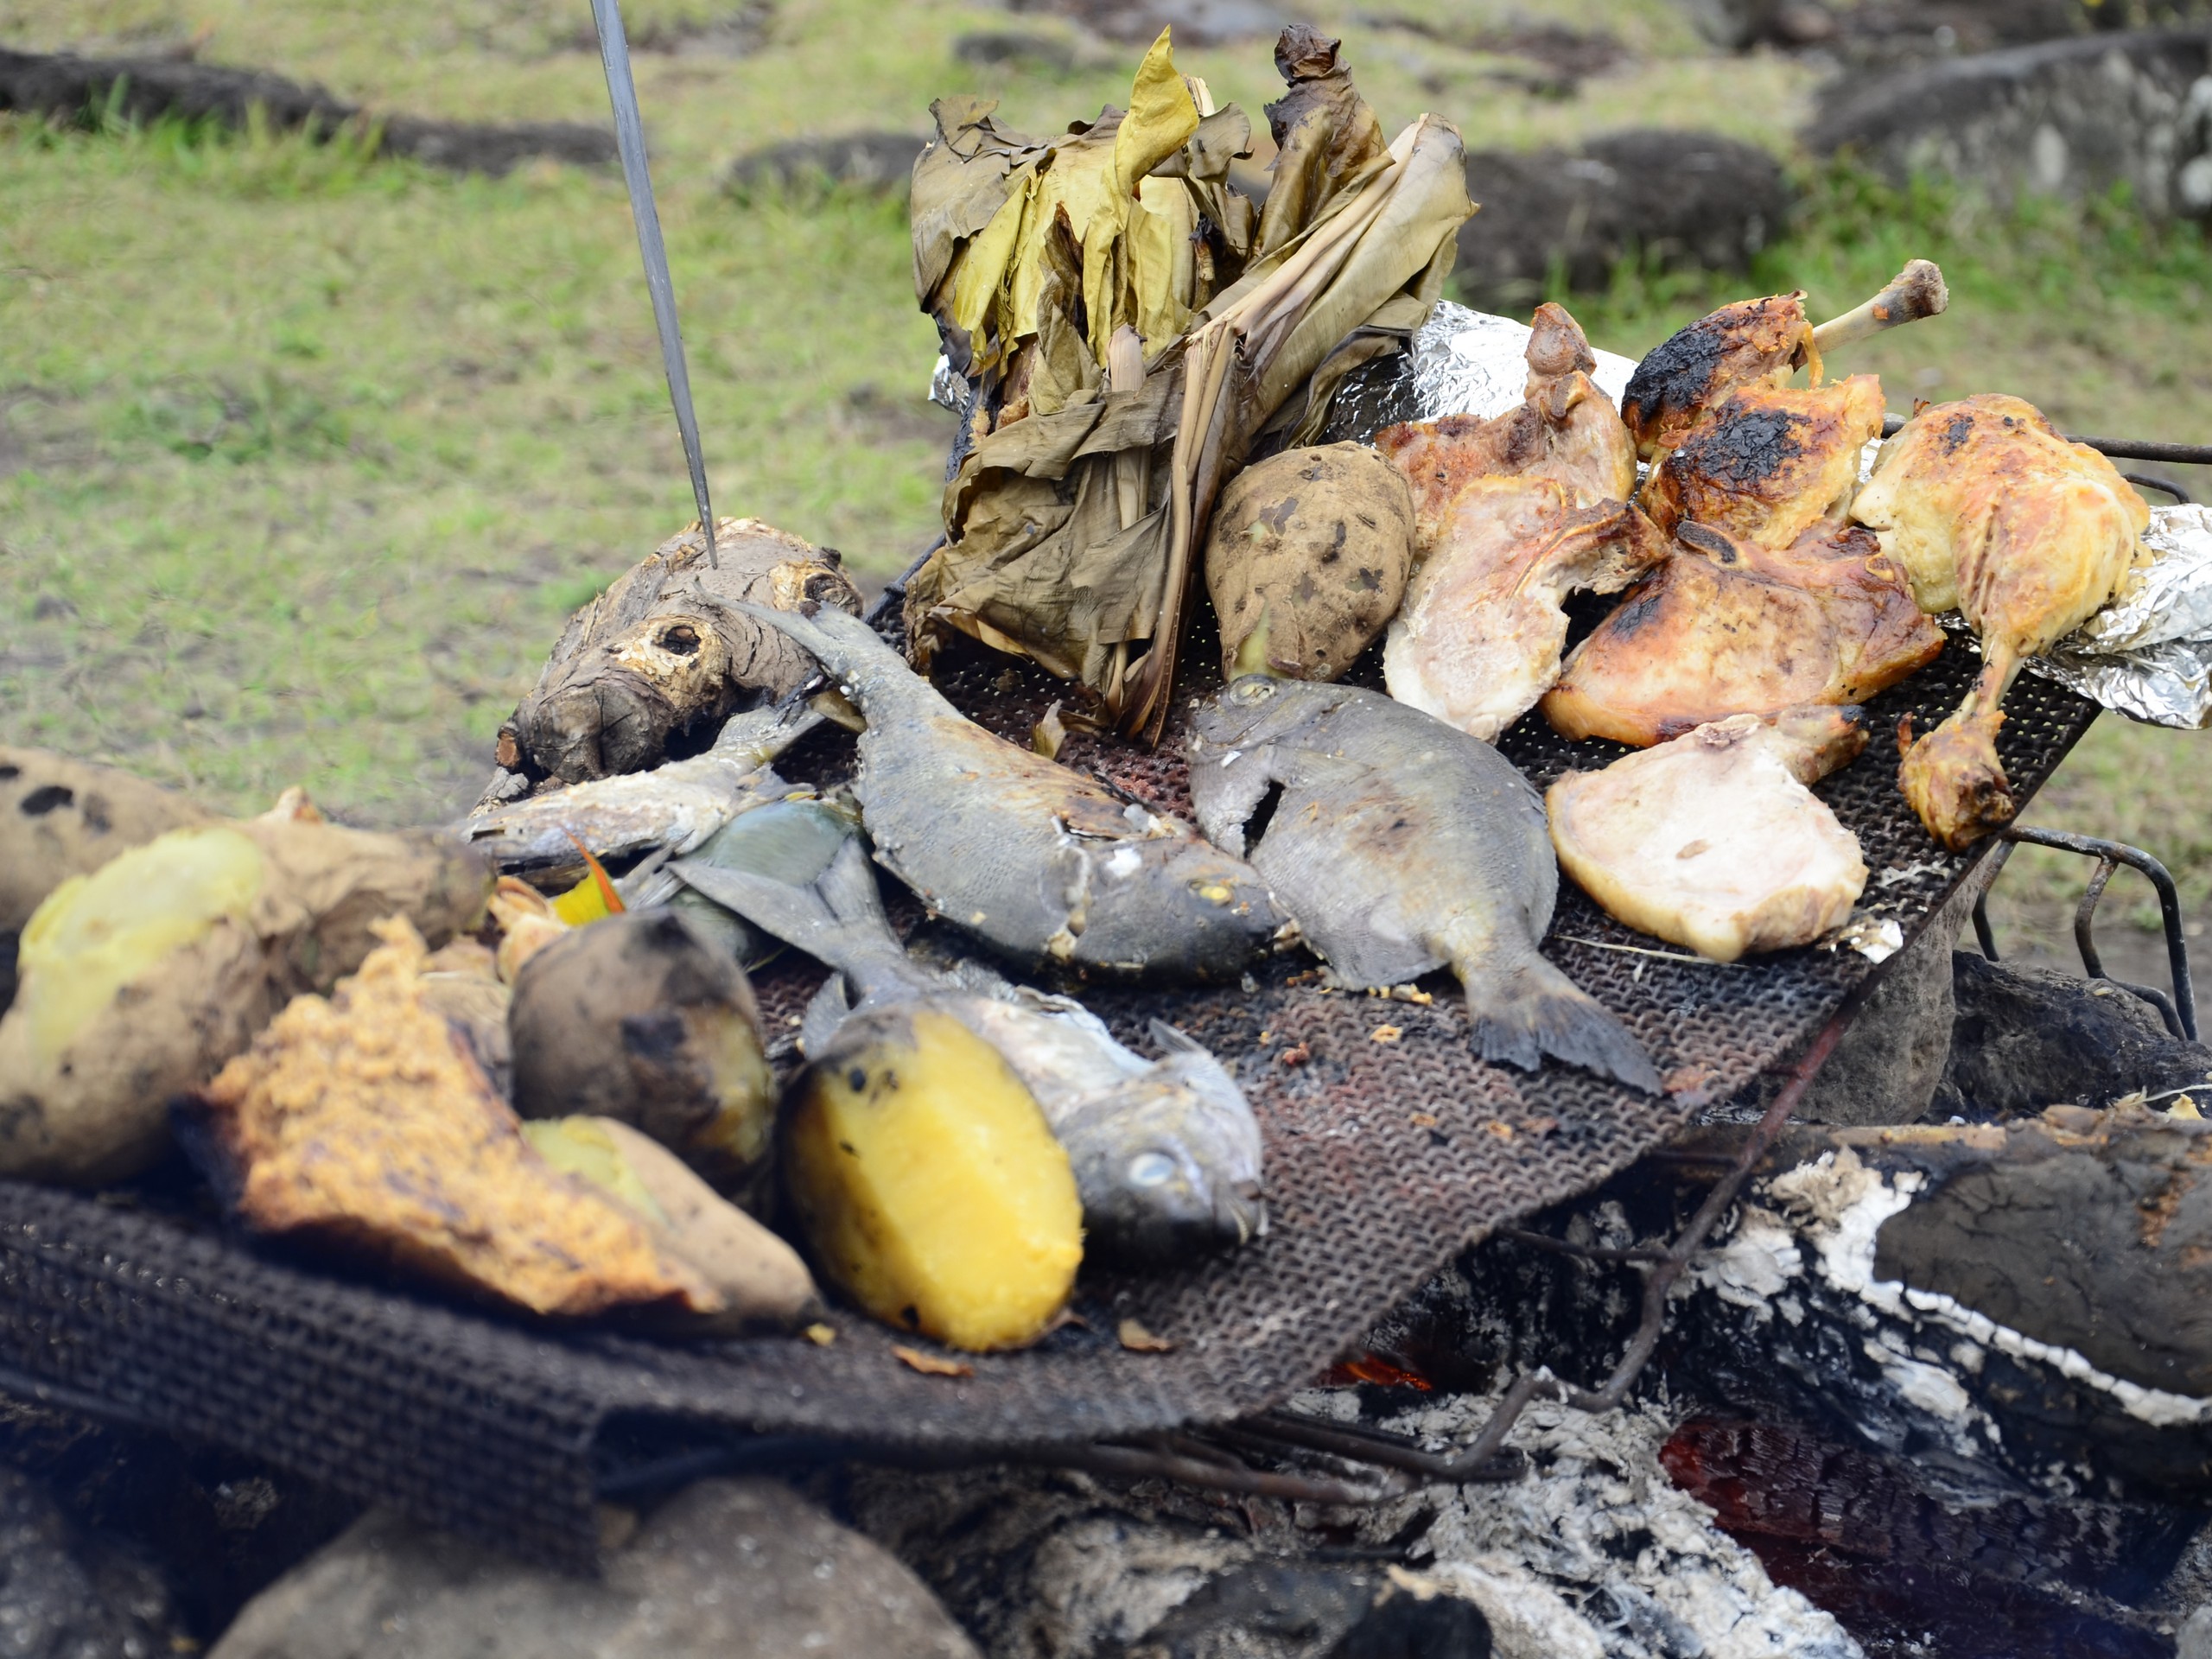 Cooking fish during the guided Easter Island tour